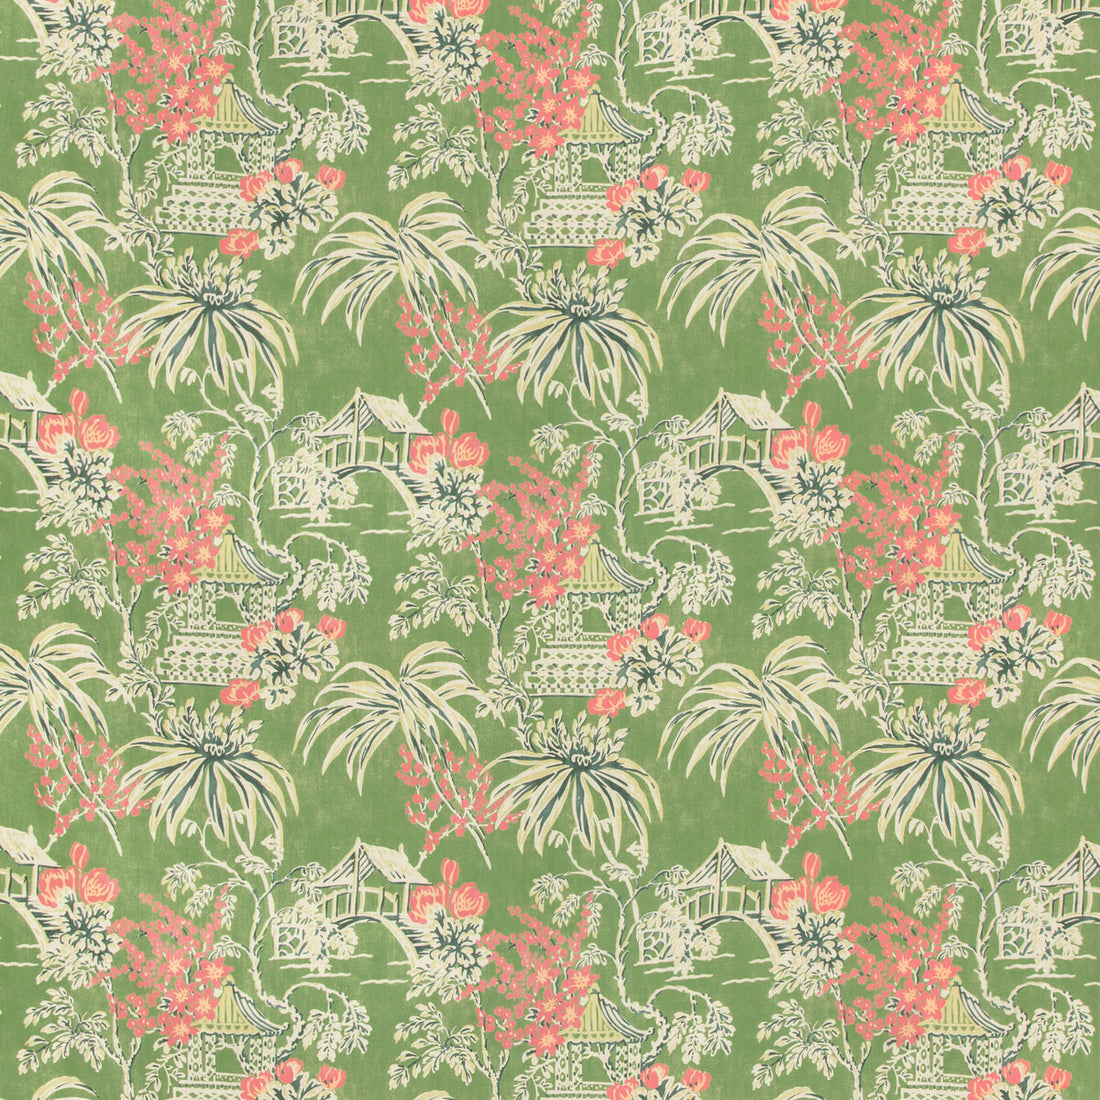 Tongli Print fabric in fern color - pattern 8019138.33.0 - by Brunschwig &amp; Fils in the Summer Palace collection